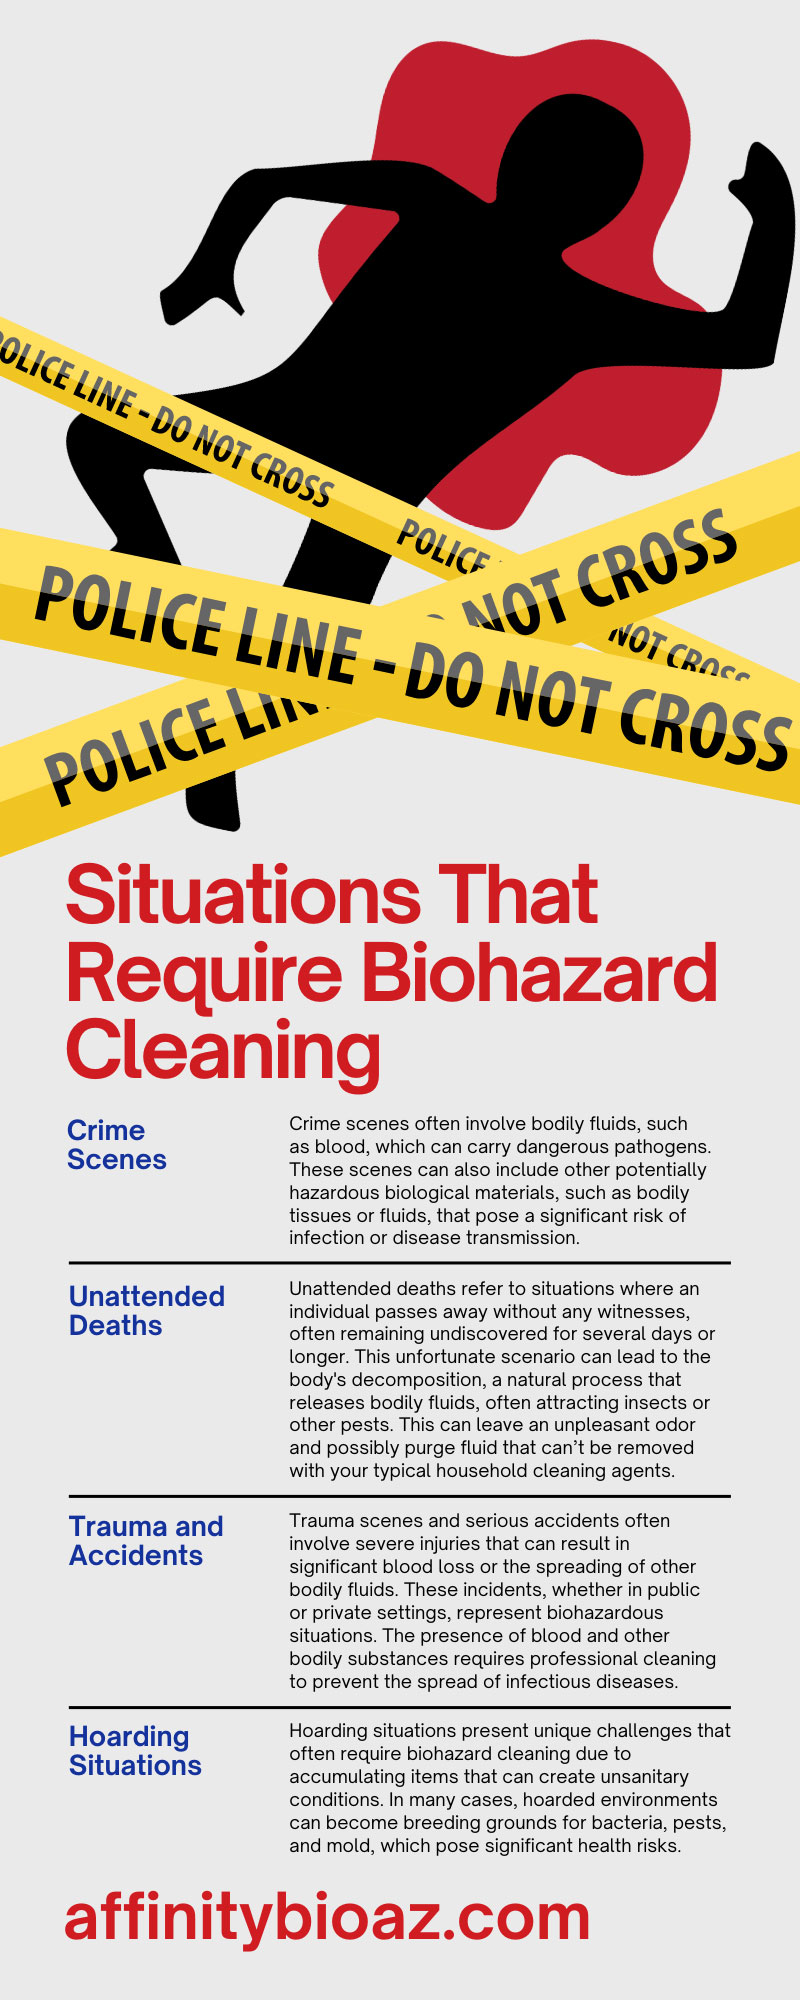 8 Situations That Require Biohazard Cleaning